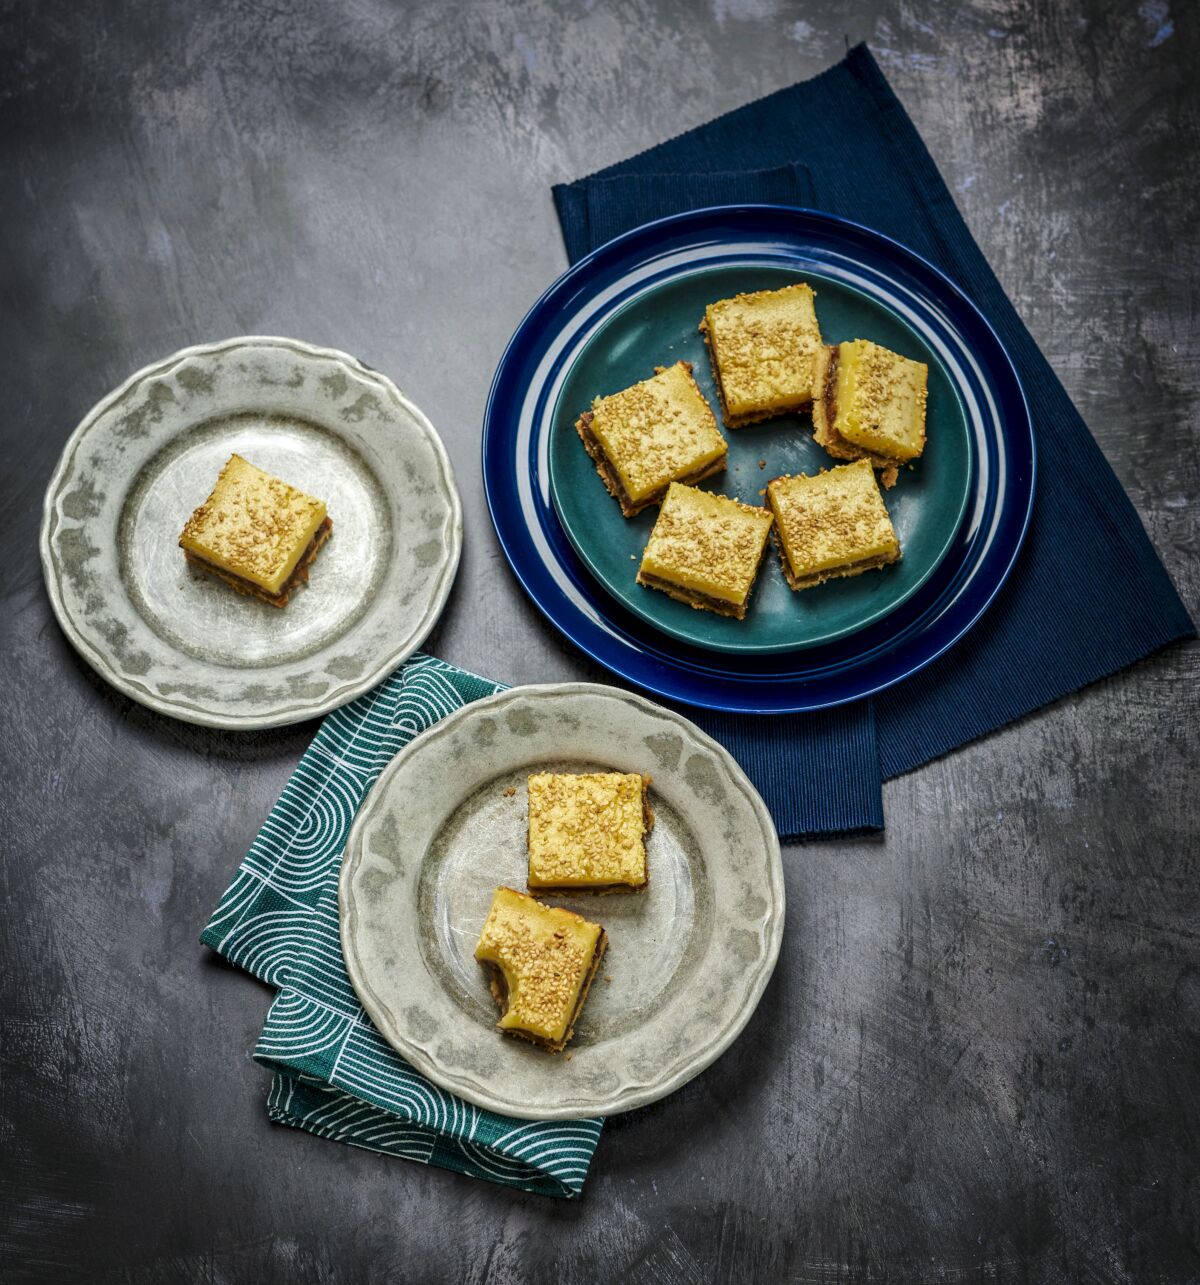 Lemon Bars With Date and Sesame are plated up and ready to eat.